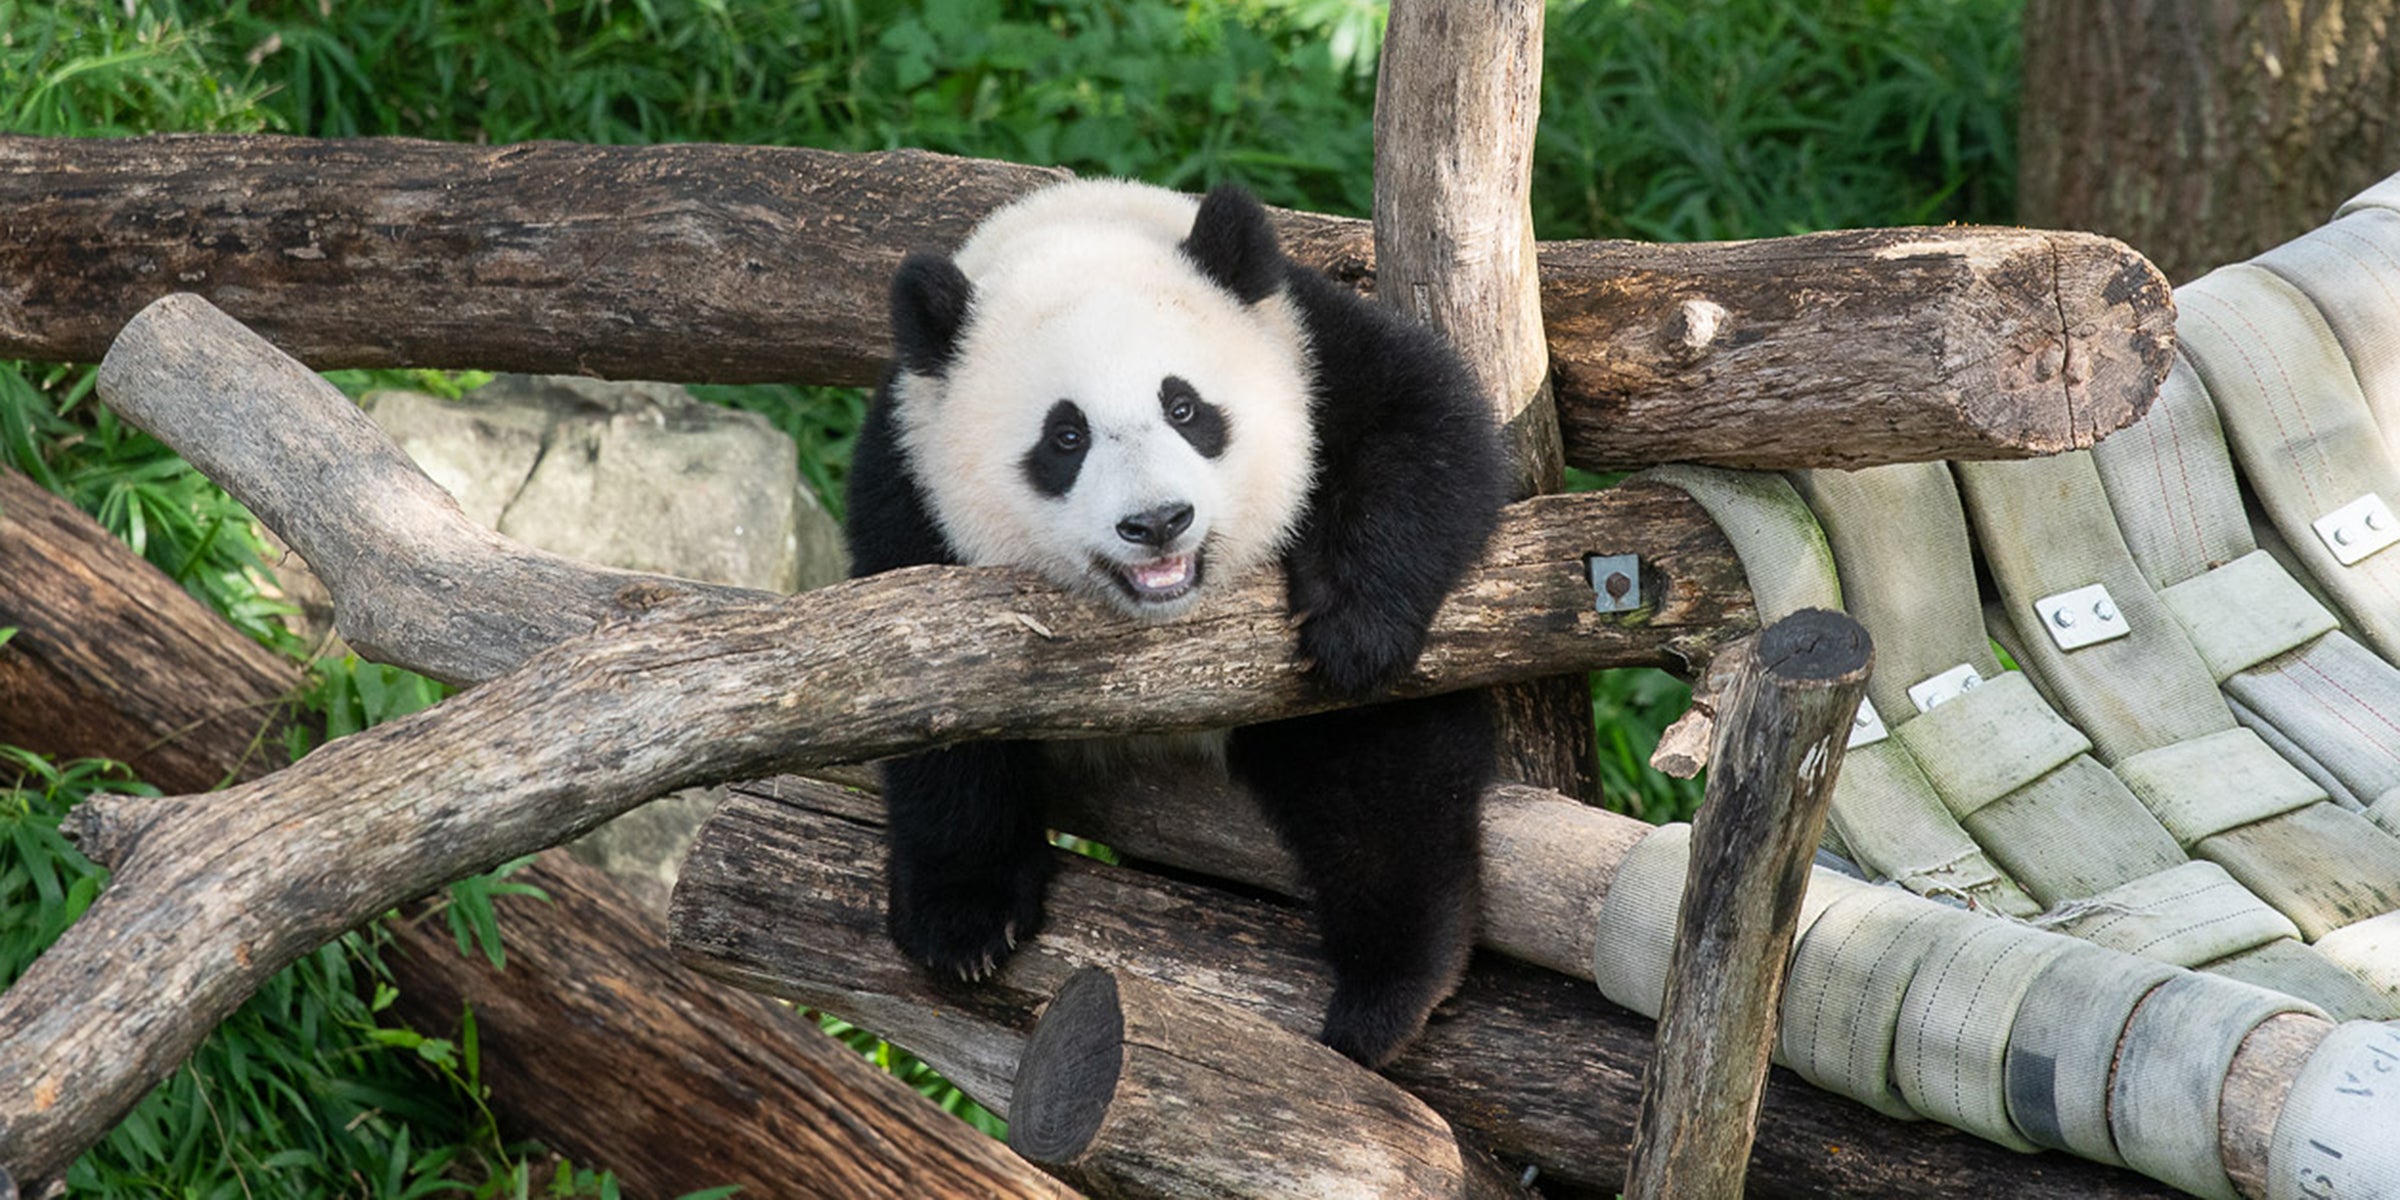 50 Panda Facts to Celebrate 50 Years of Giant Pandas at the Smithsonian's  National Zoo | Smithsonian's National Zoo